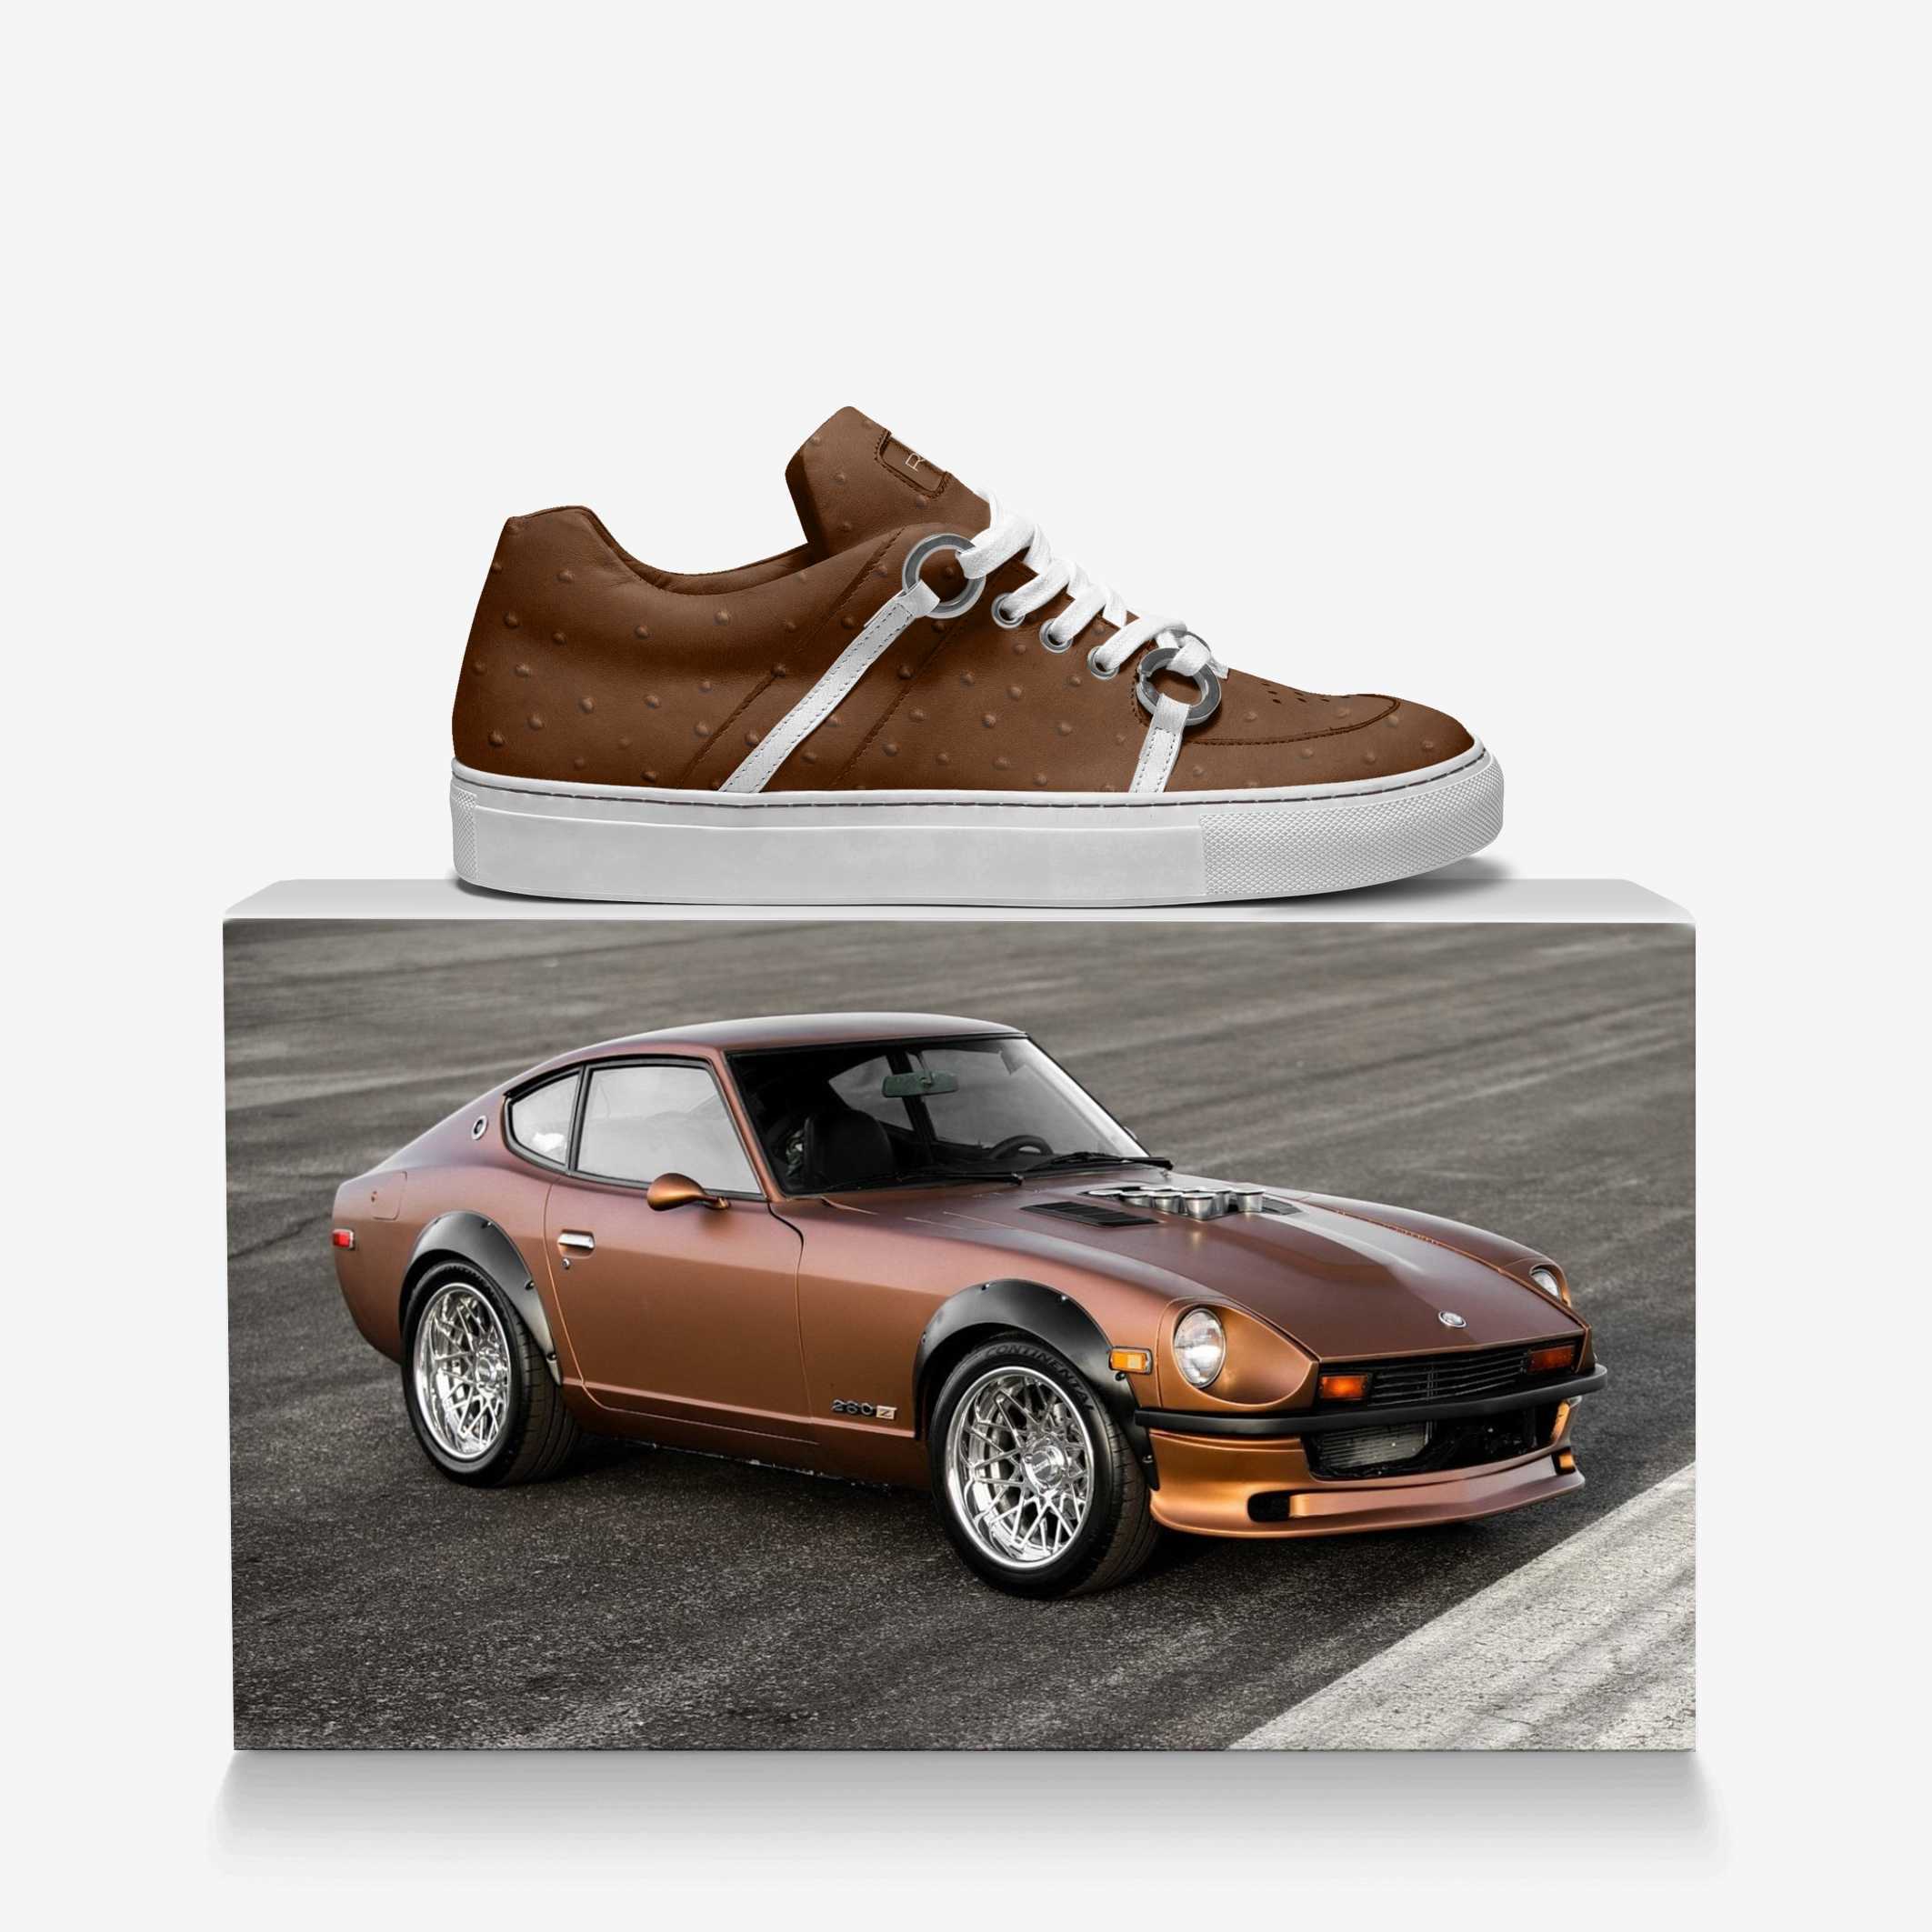 '77 FAIRLADY (From The 305 Collection) - Riddick Shoes Shoe Riddick Shoes   